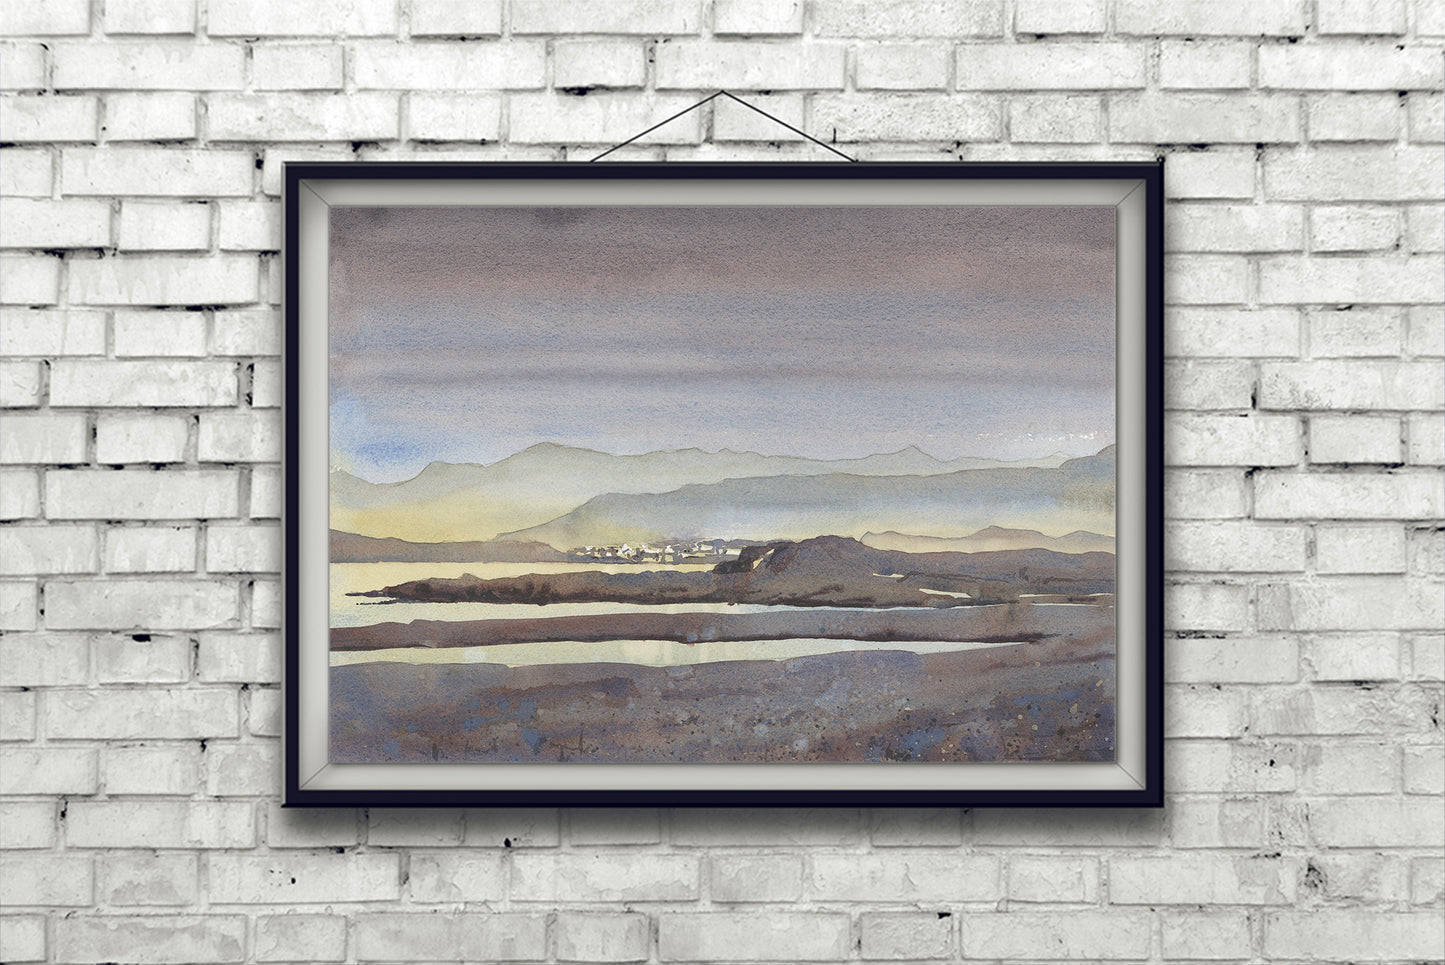 Colorful sunset art Iceland landscape small town handmade item housewarming gift giclee (print)